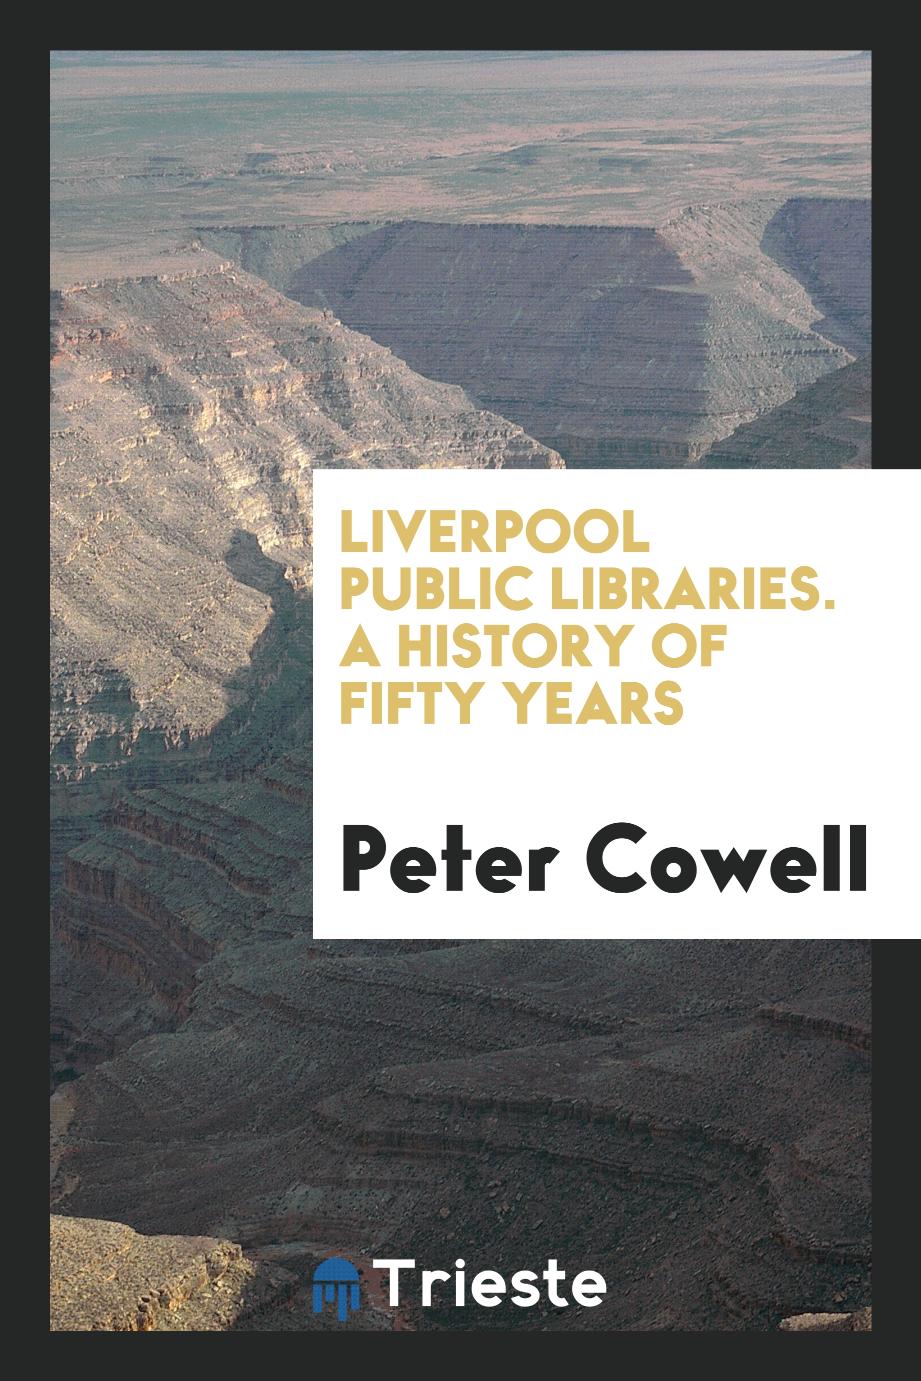 Liverpool public libraries. A history of fifty years